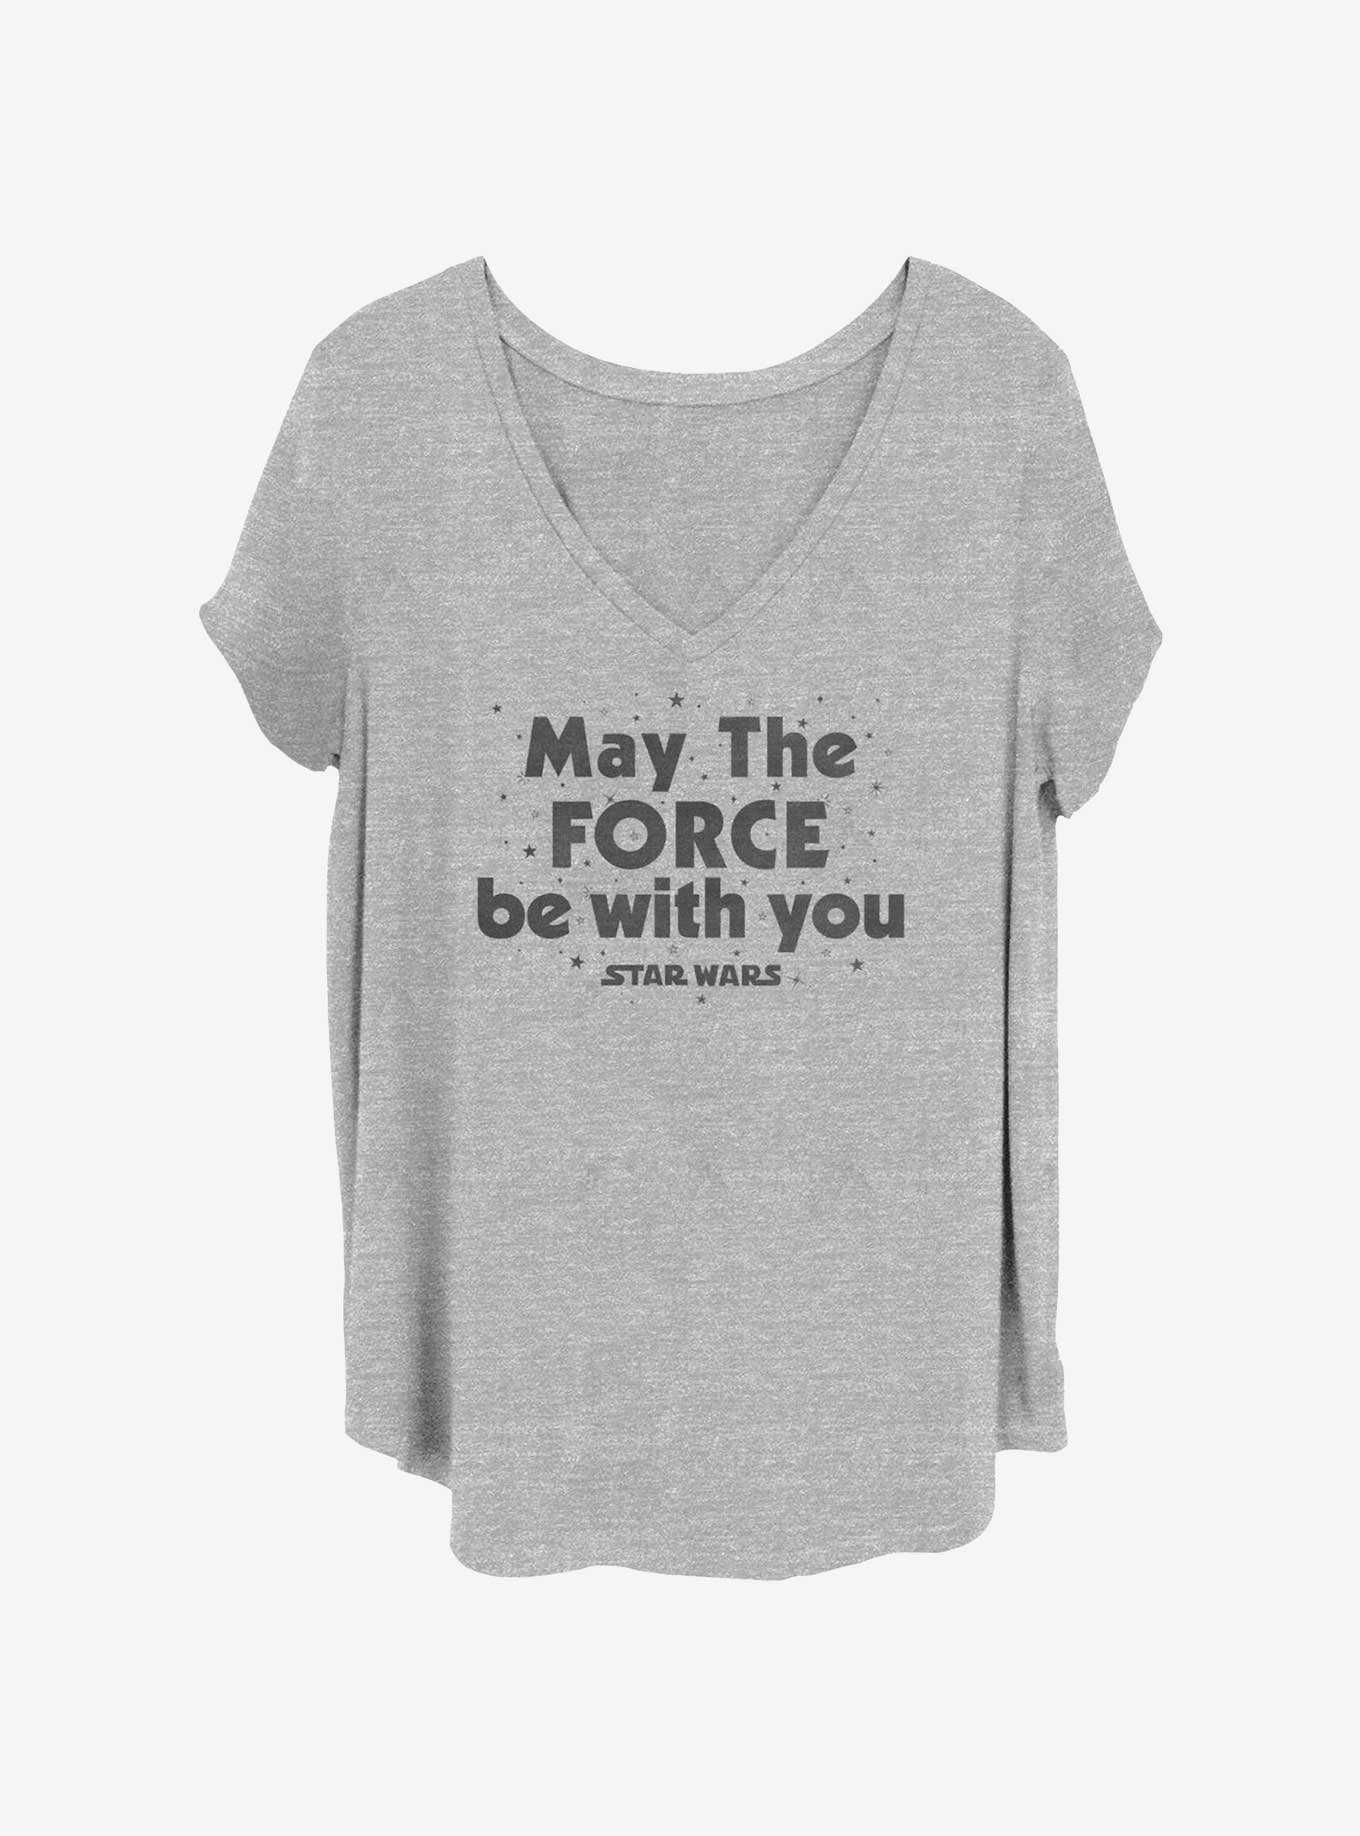 Star Wars May The Force Be With You Girls T-Shirt Plus Size, , hi-res